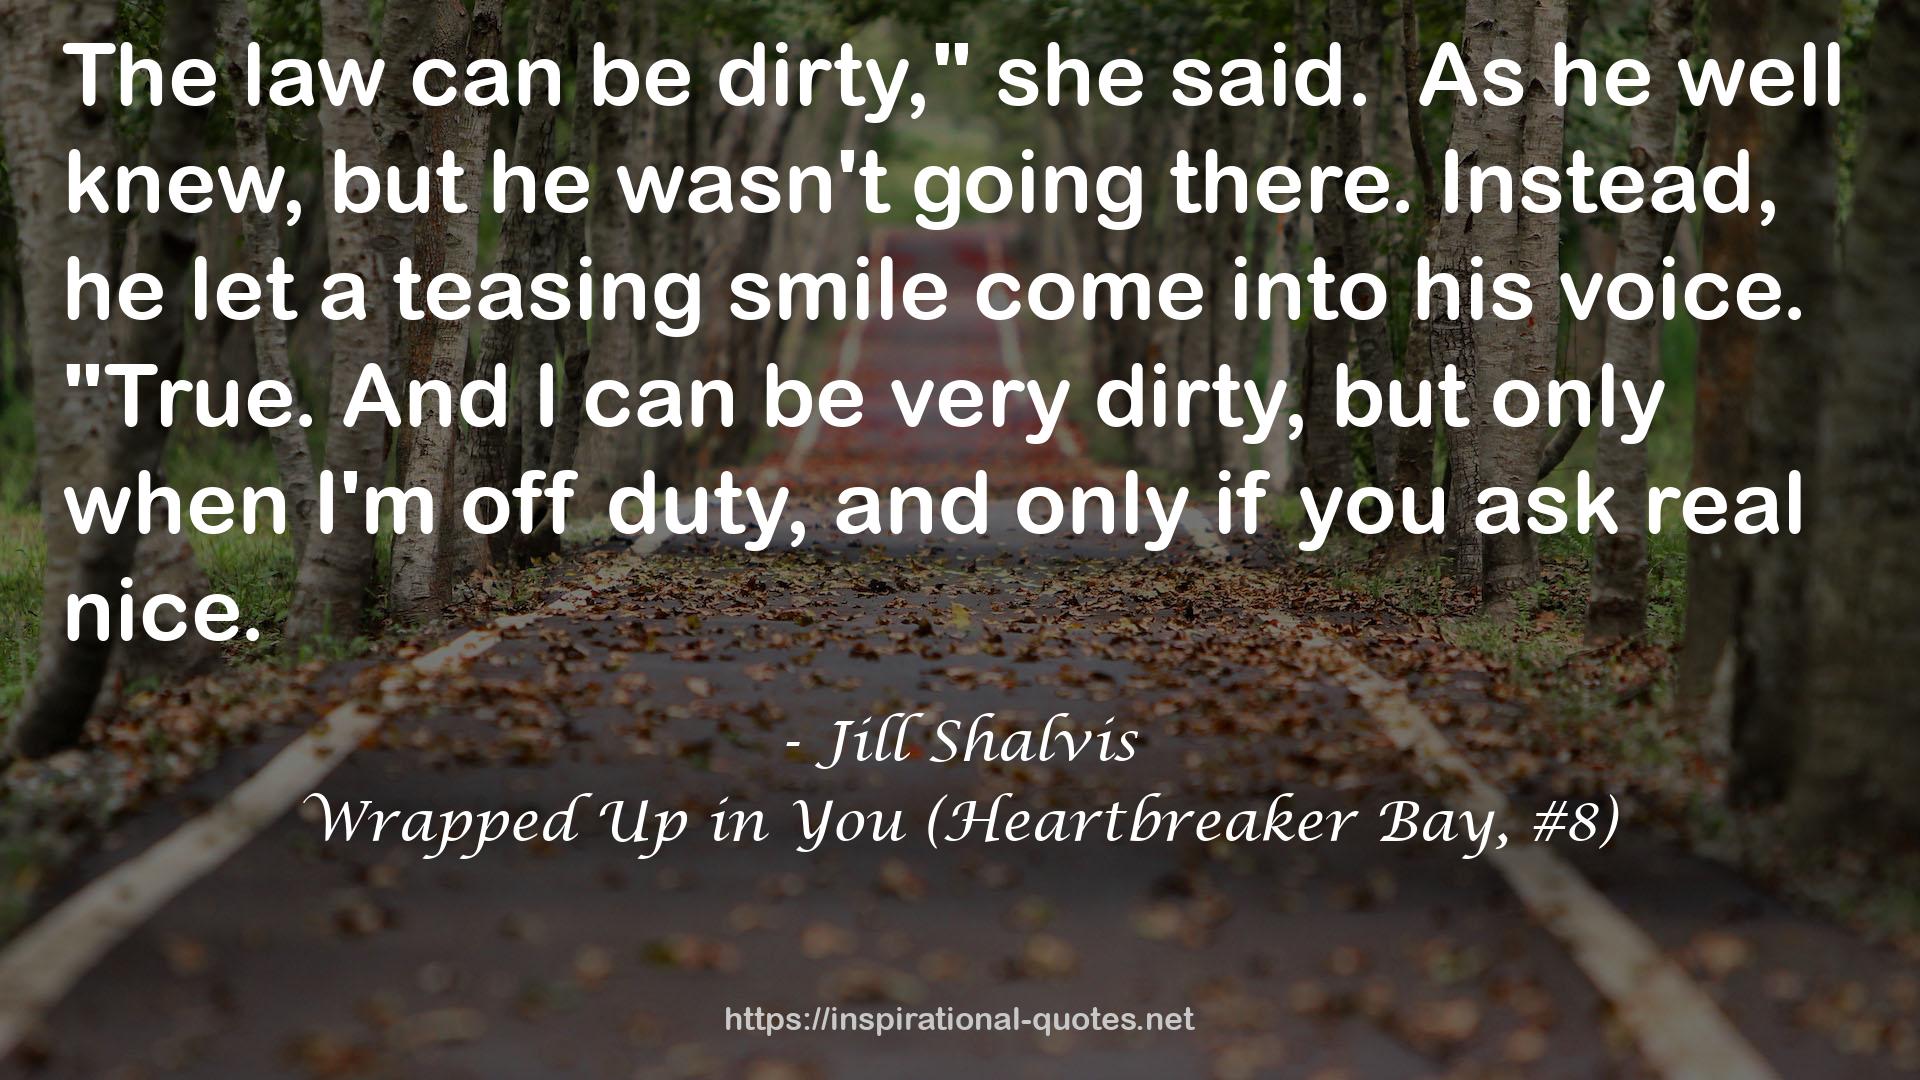 Wrapped Up in You (Heartbreaker Bay, #8) QUOTES